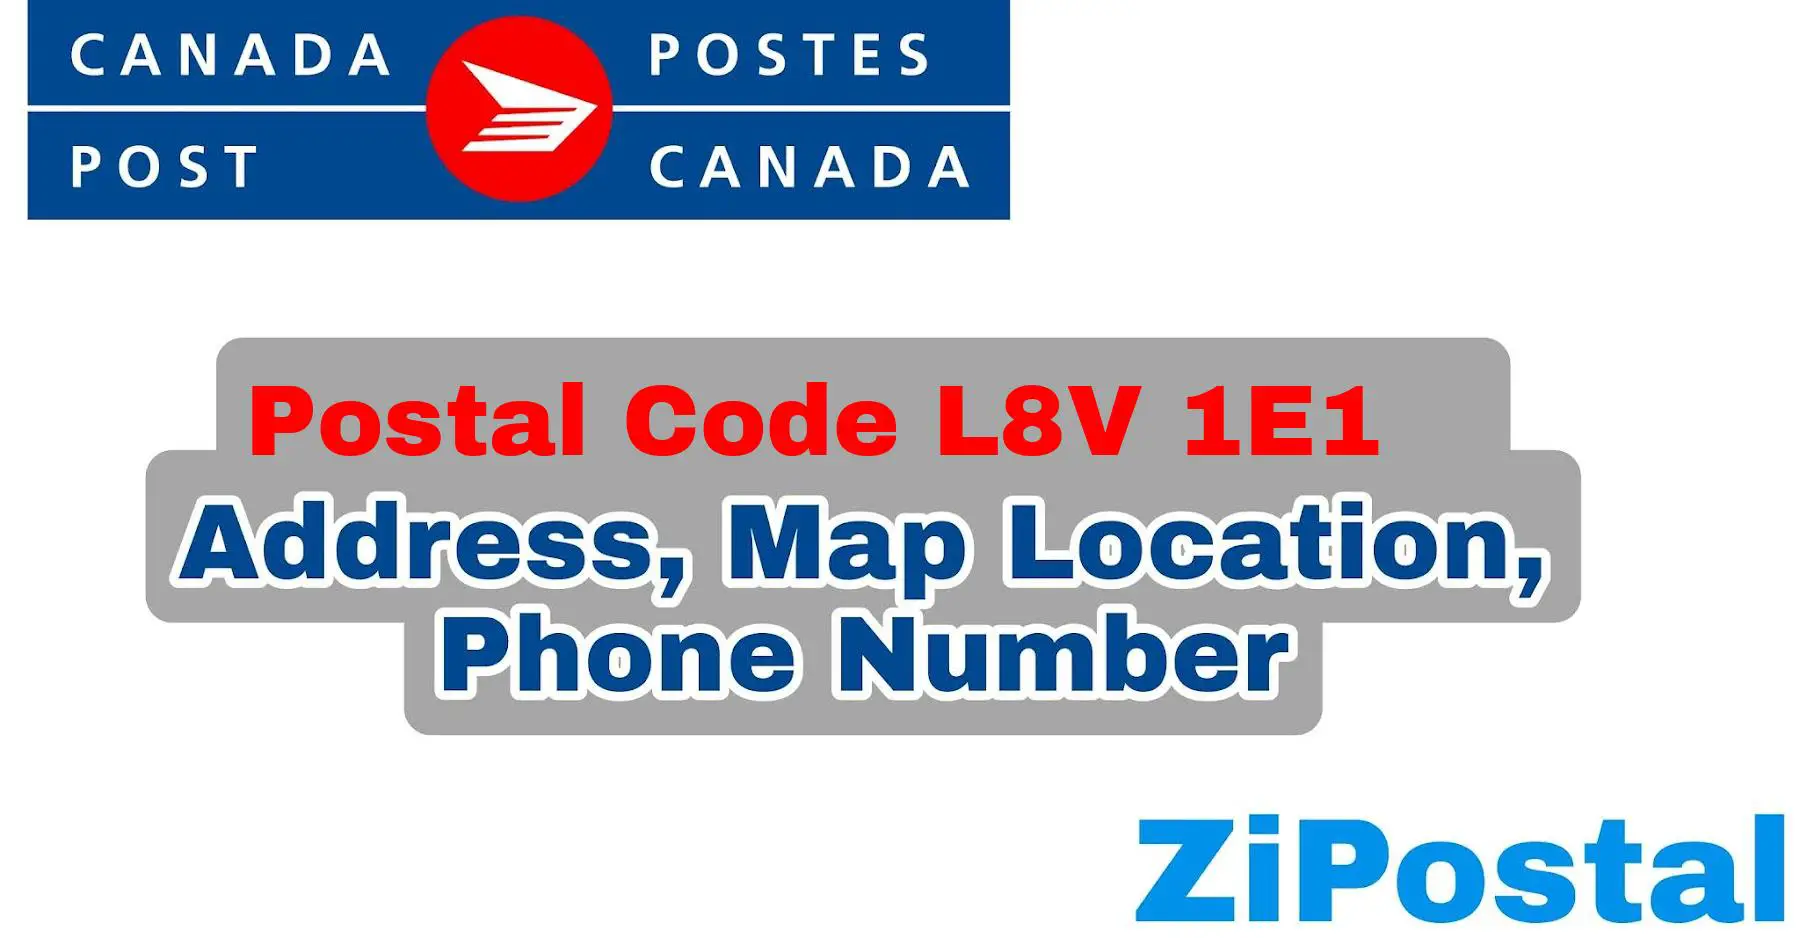 Postal Code L8V 1E1 Address Map Location and Phone Number